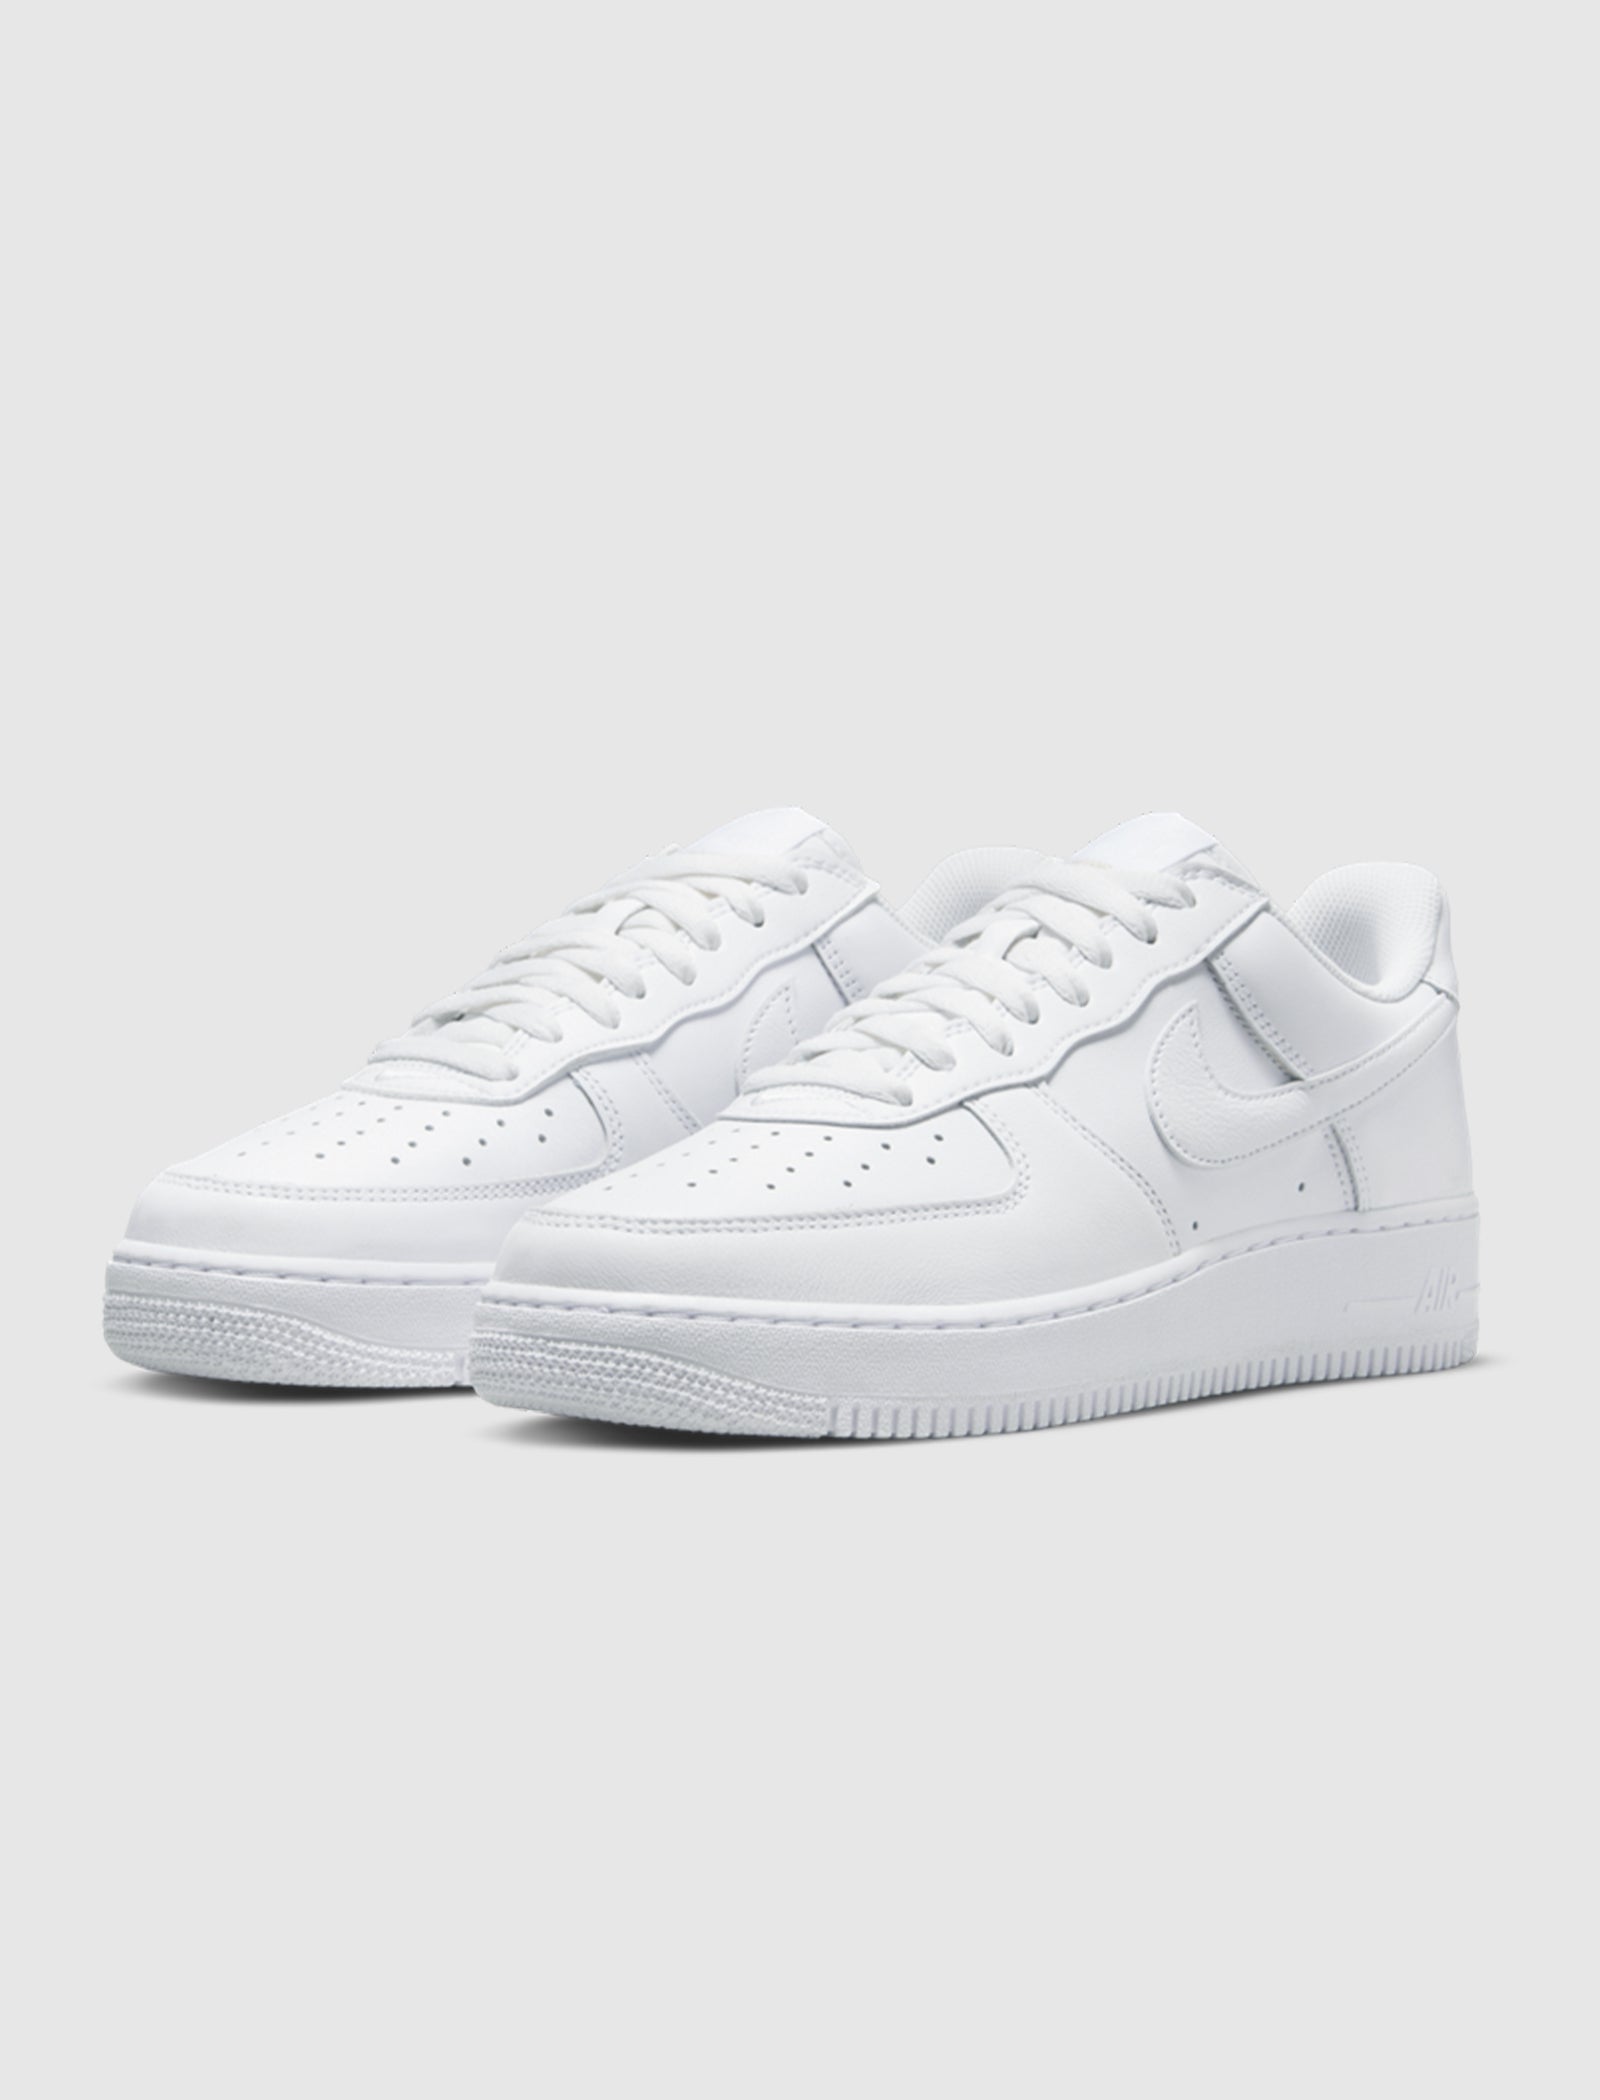 AIR FORCE 1 LOW "SINCE 82"